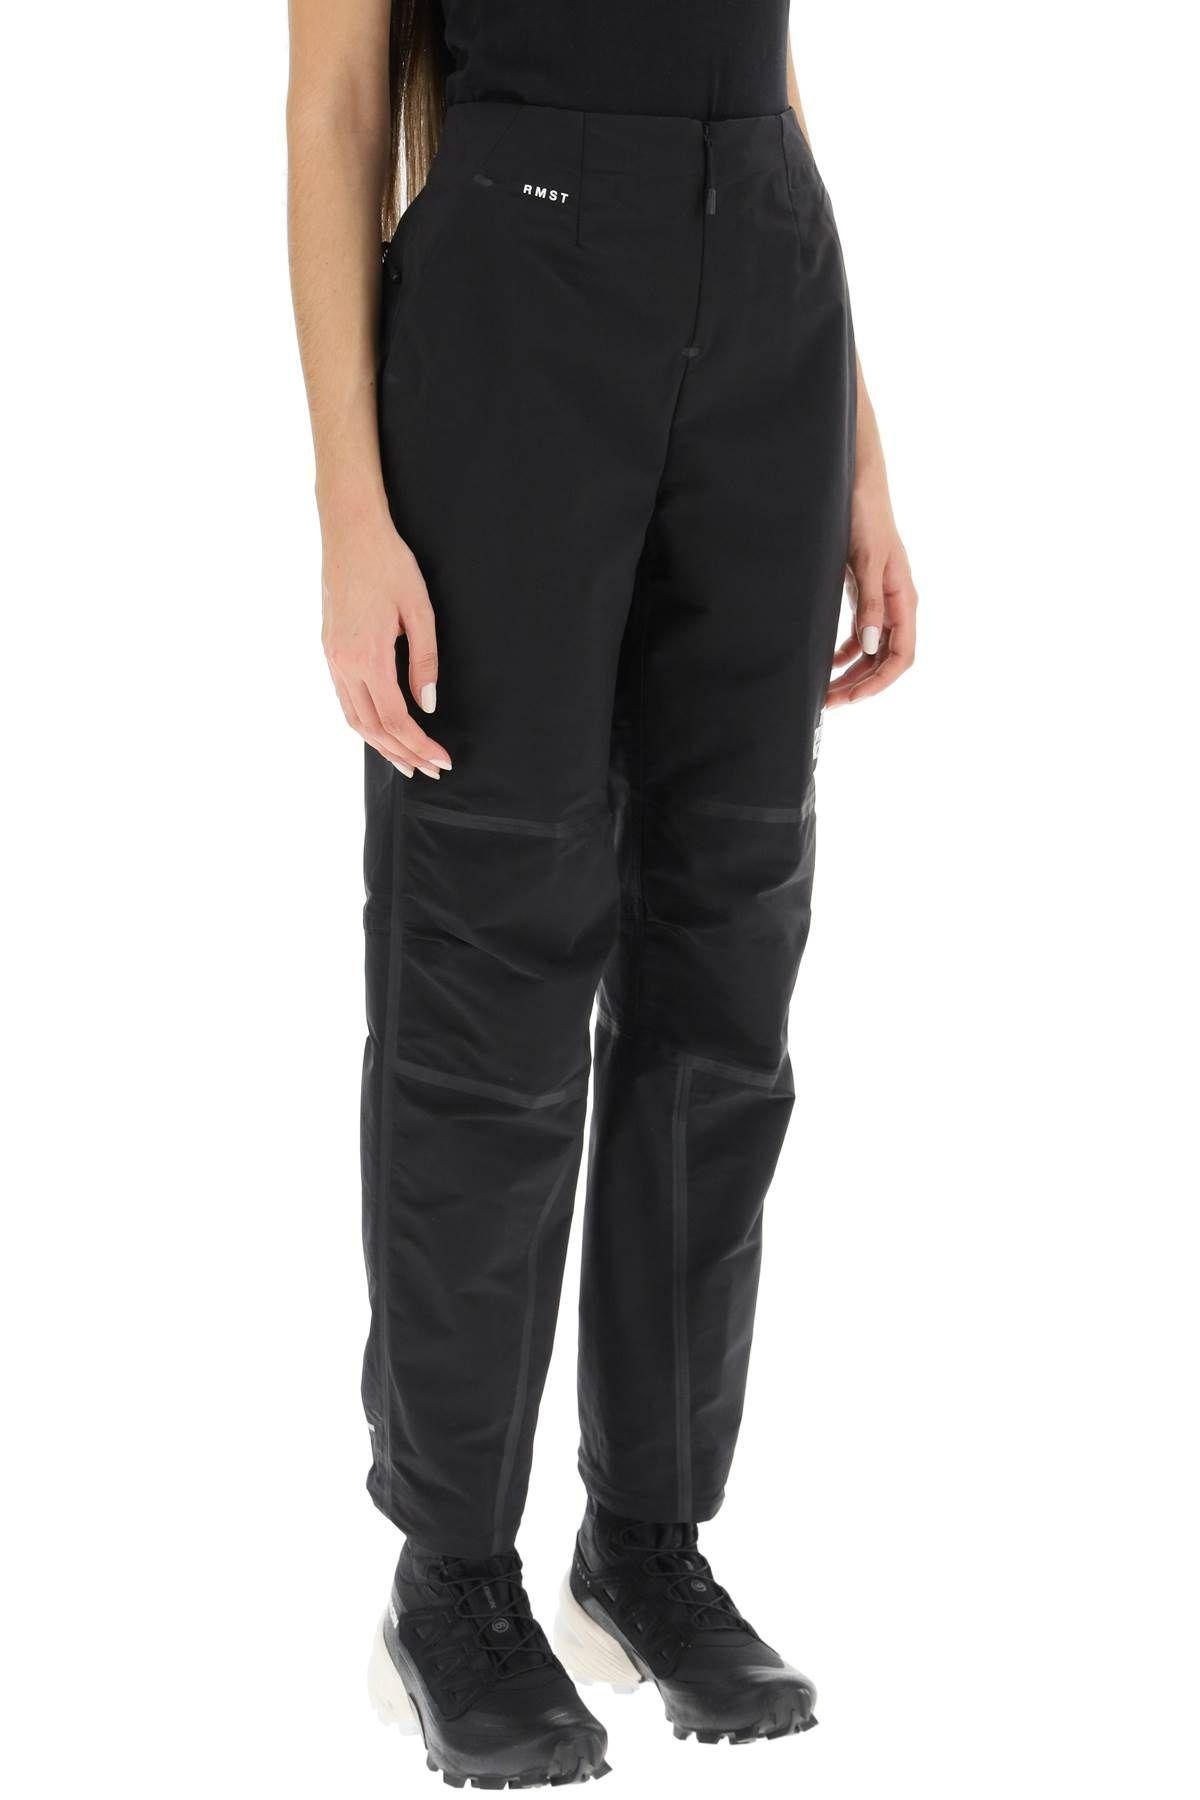 'MOUNTAIN RMST' PANTS THE NORTH FACE - 3